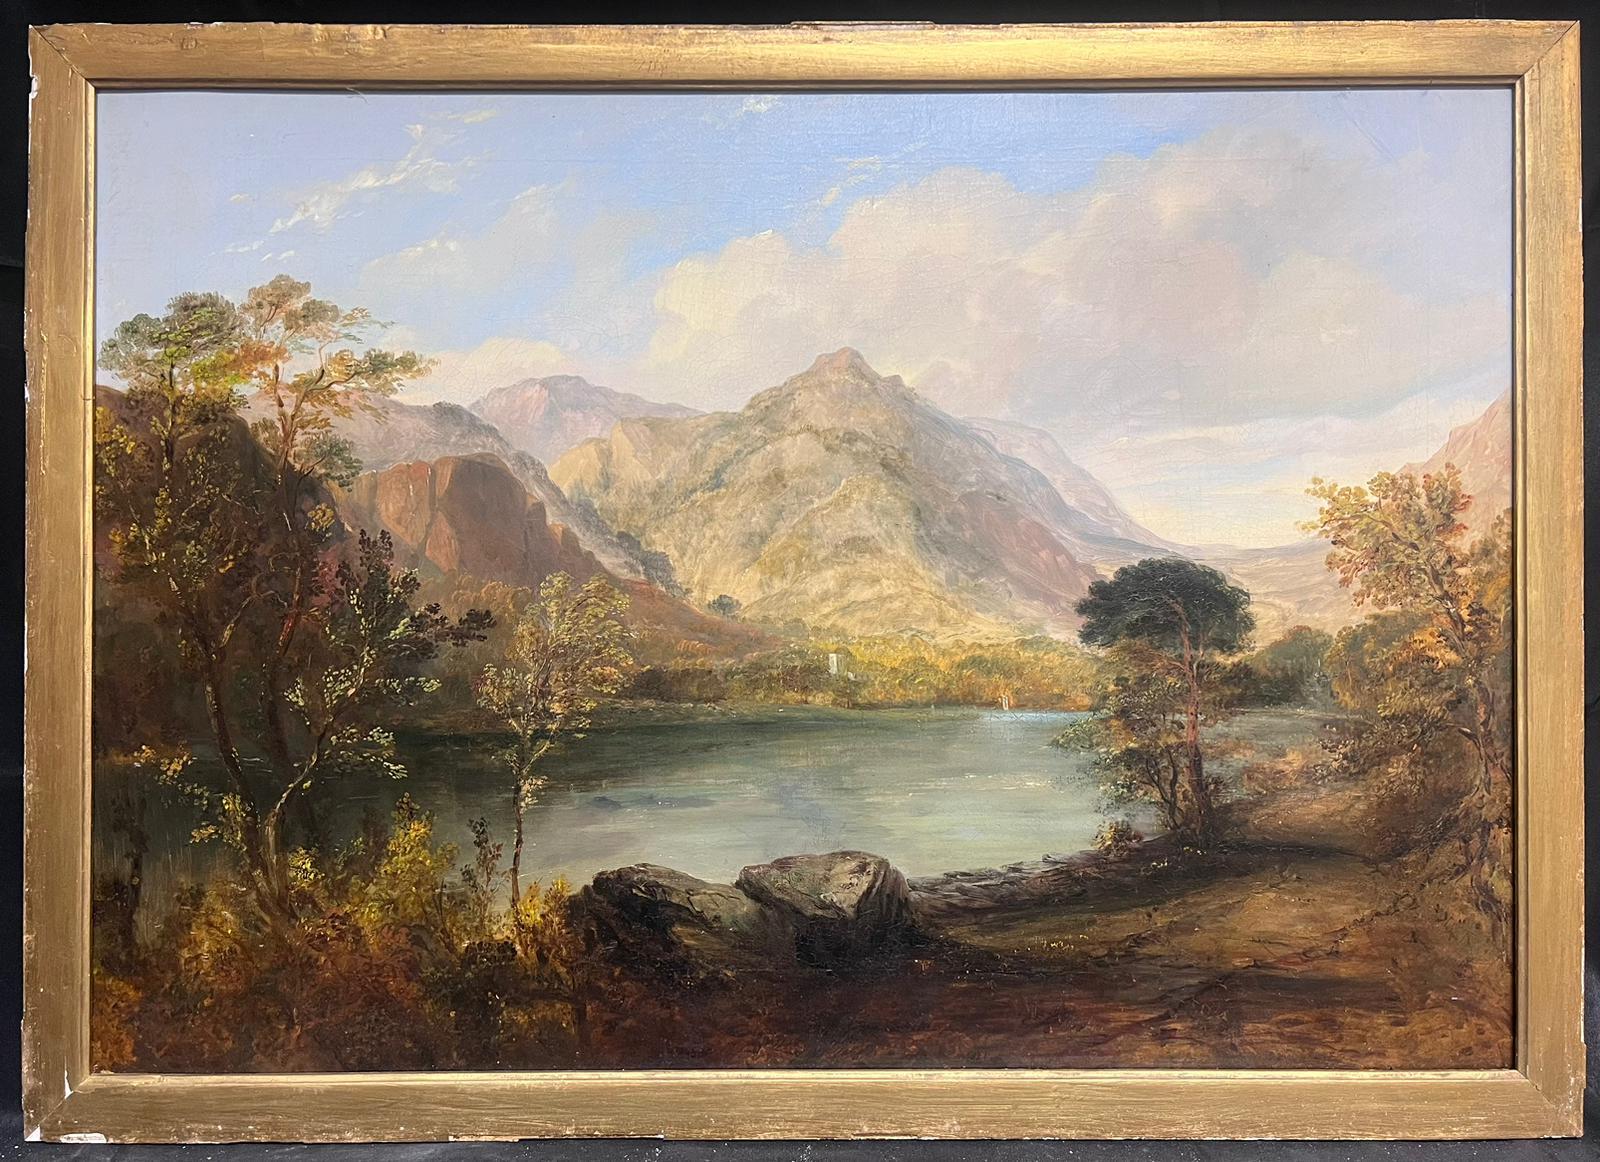 Sunshine in the Scottish Highlands
British School, 19th century
oil on canvas, framed
framed: 26.5 x 36.5 inches
canvas: 24.5 x 35.5 inches
provenance: private collection, UK
condition: very good and sound condition, the frame is quite tatty and